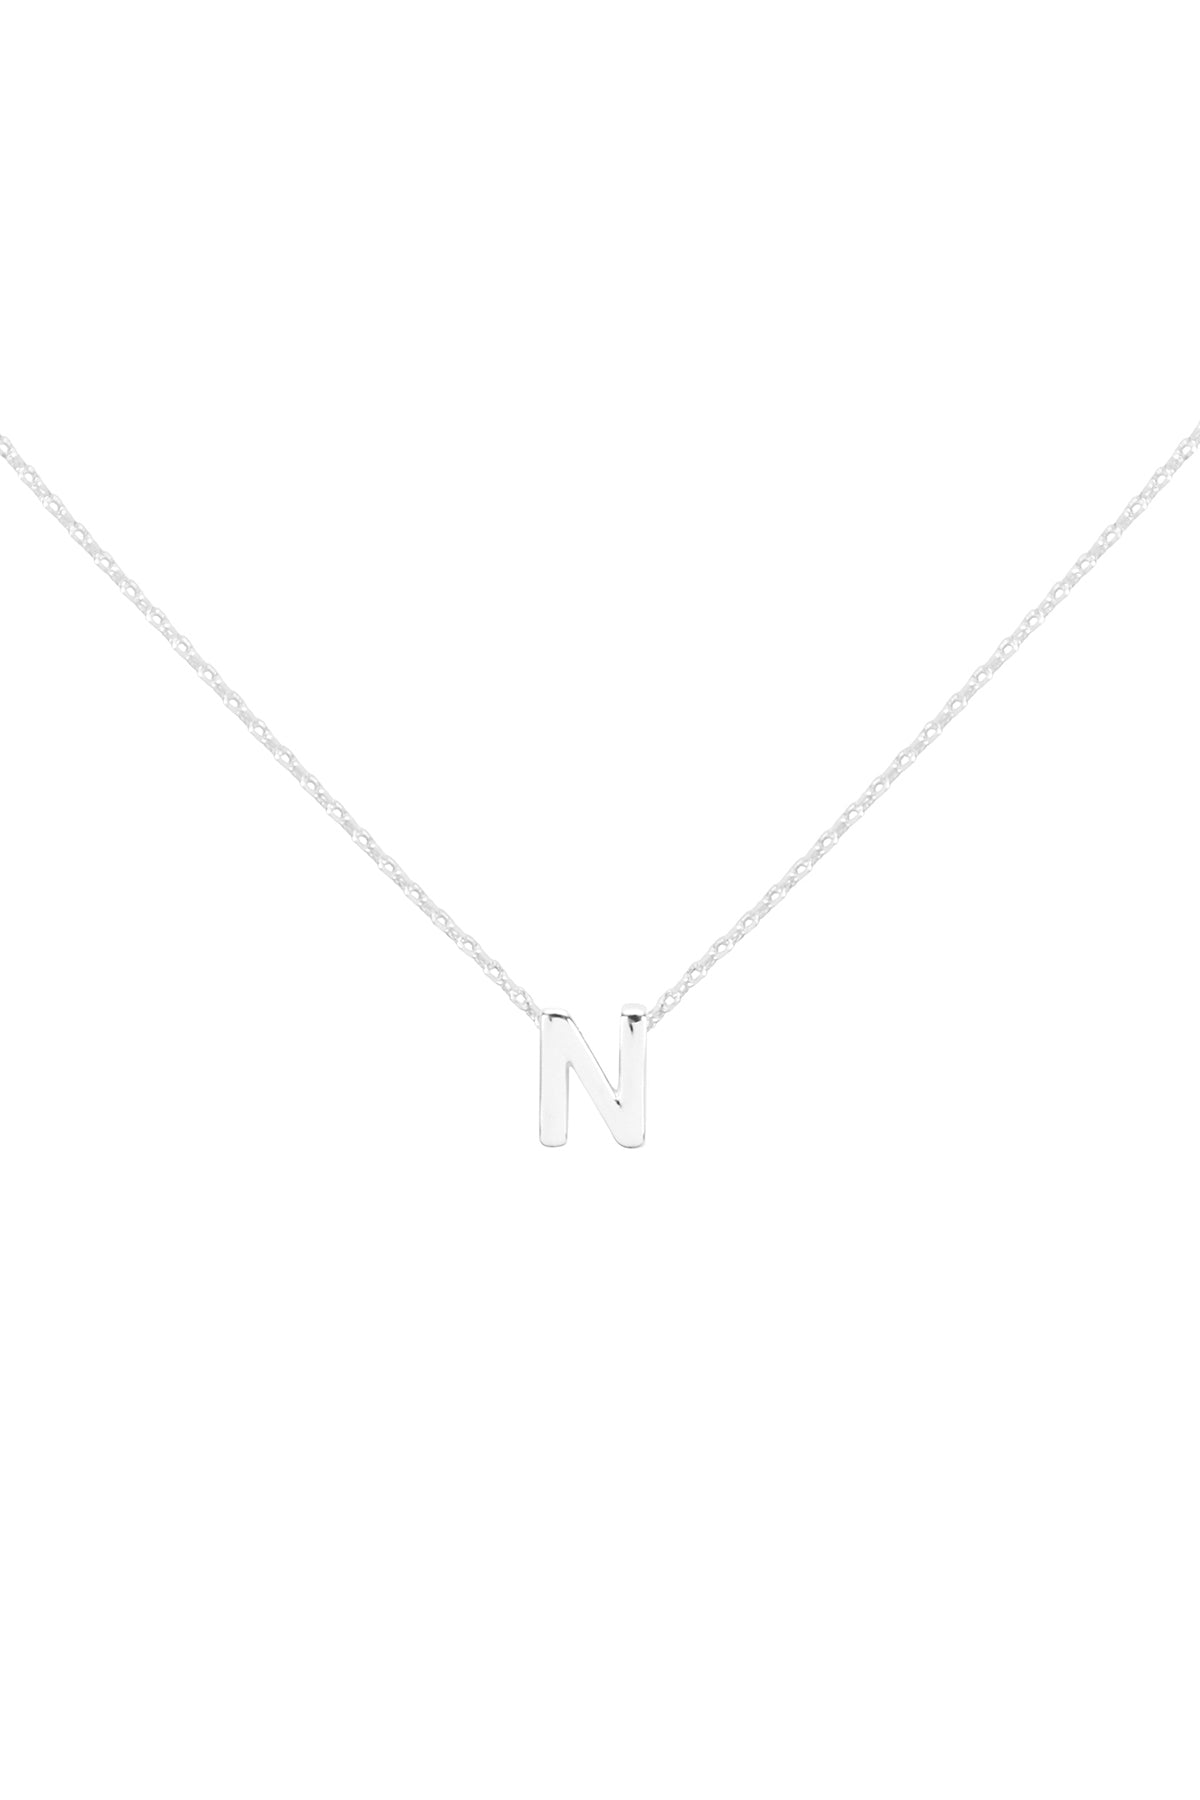 "N" INITIAL DAINTY CHARM NECKLACE